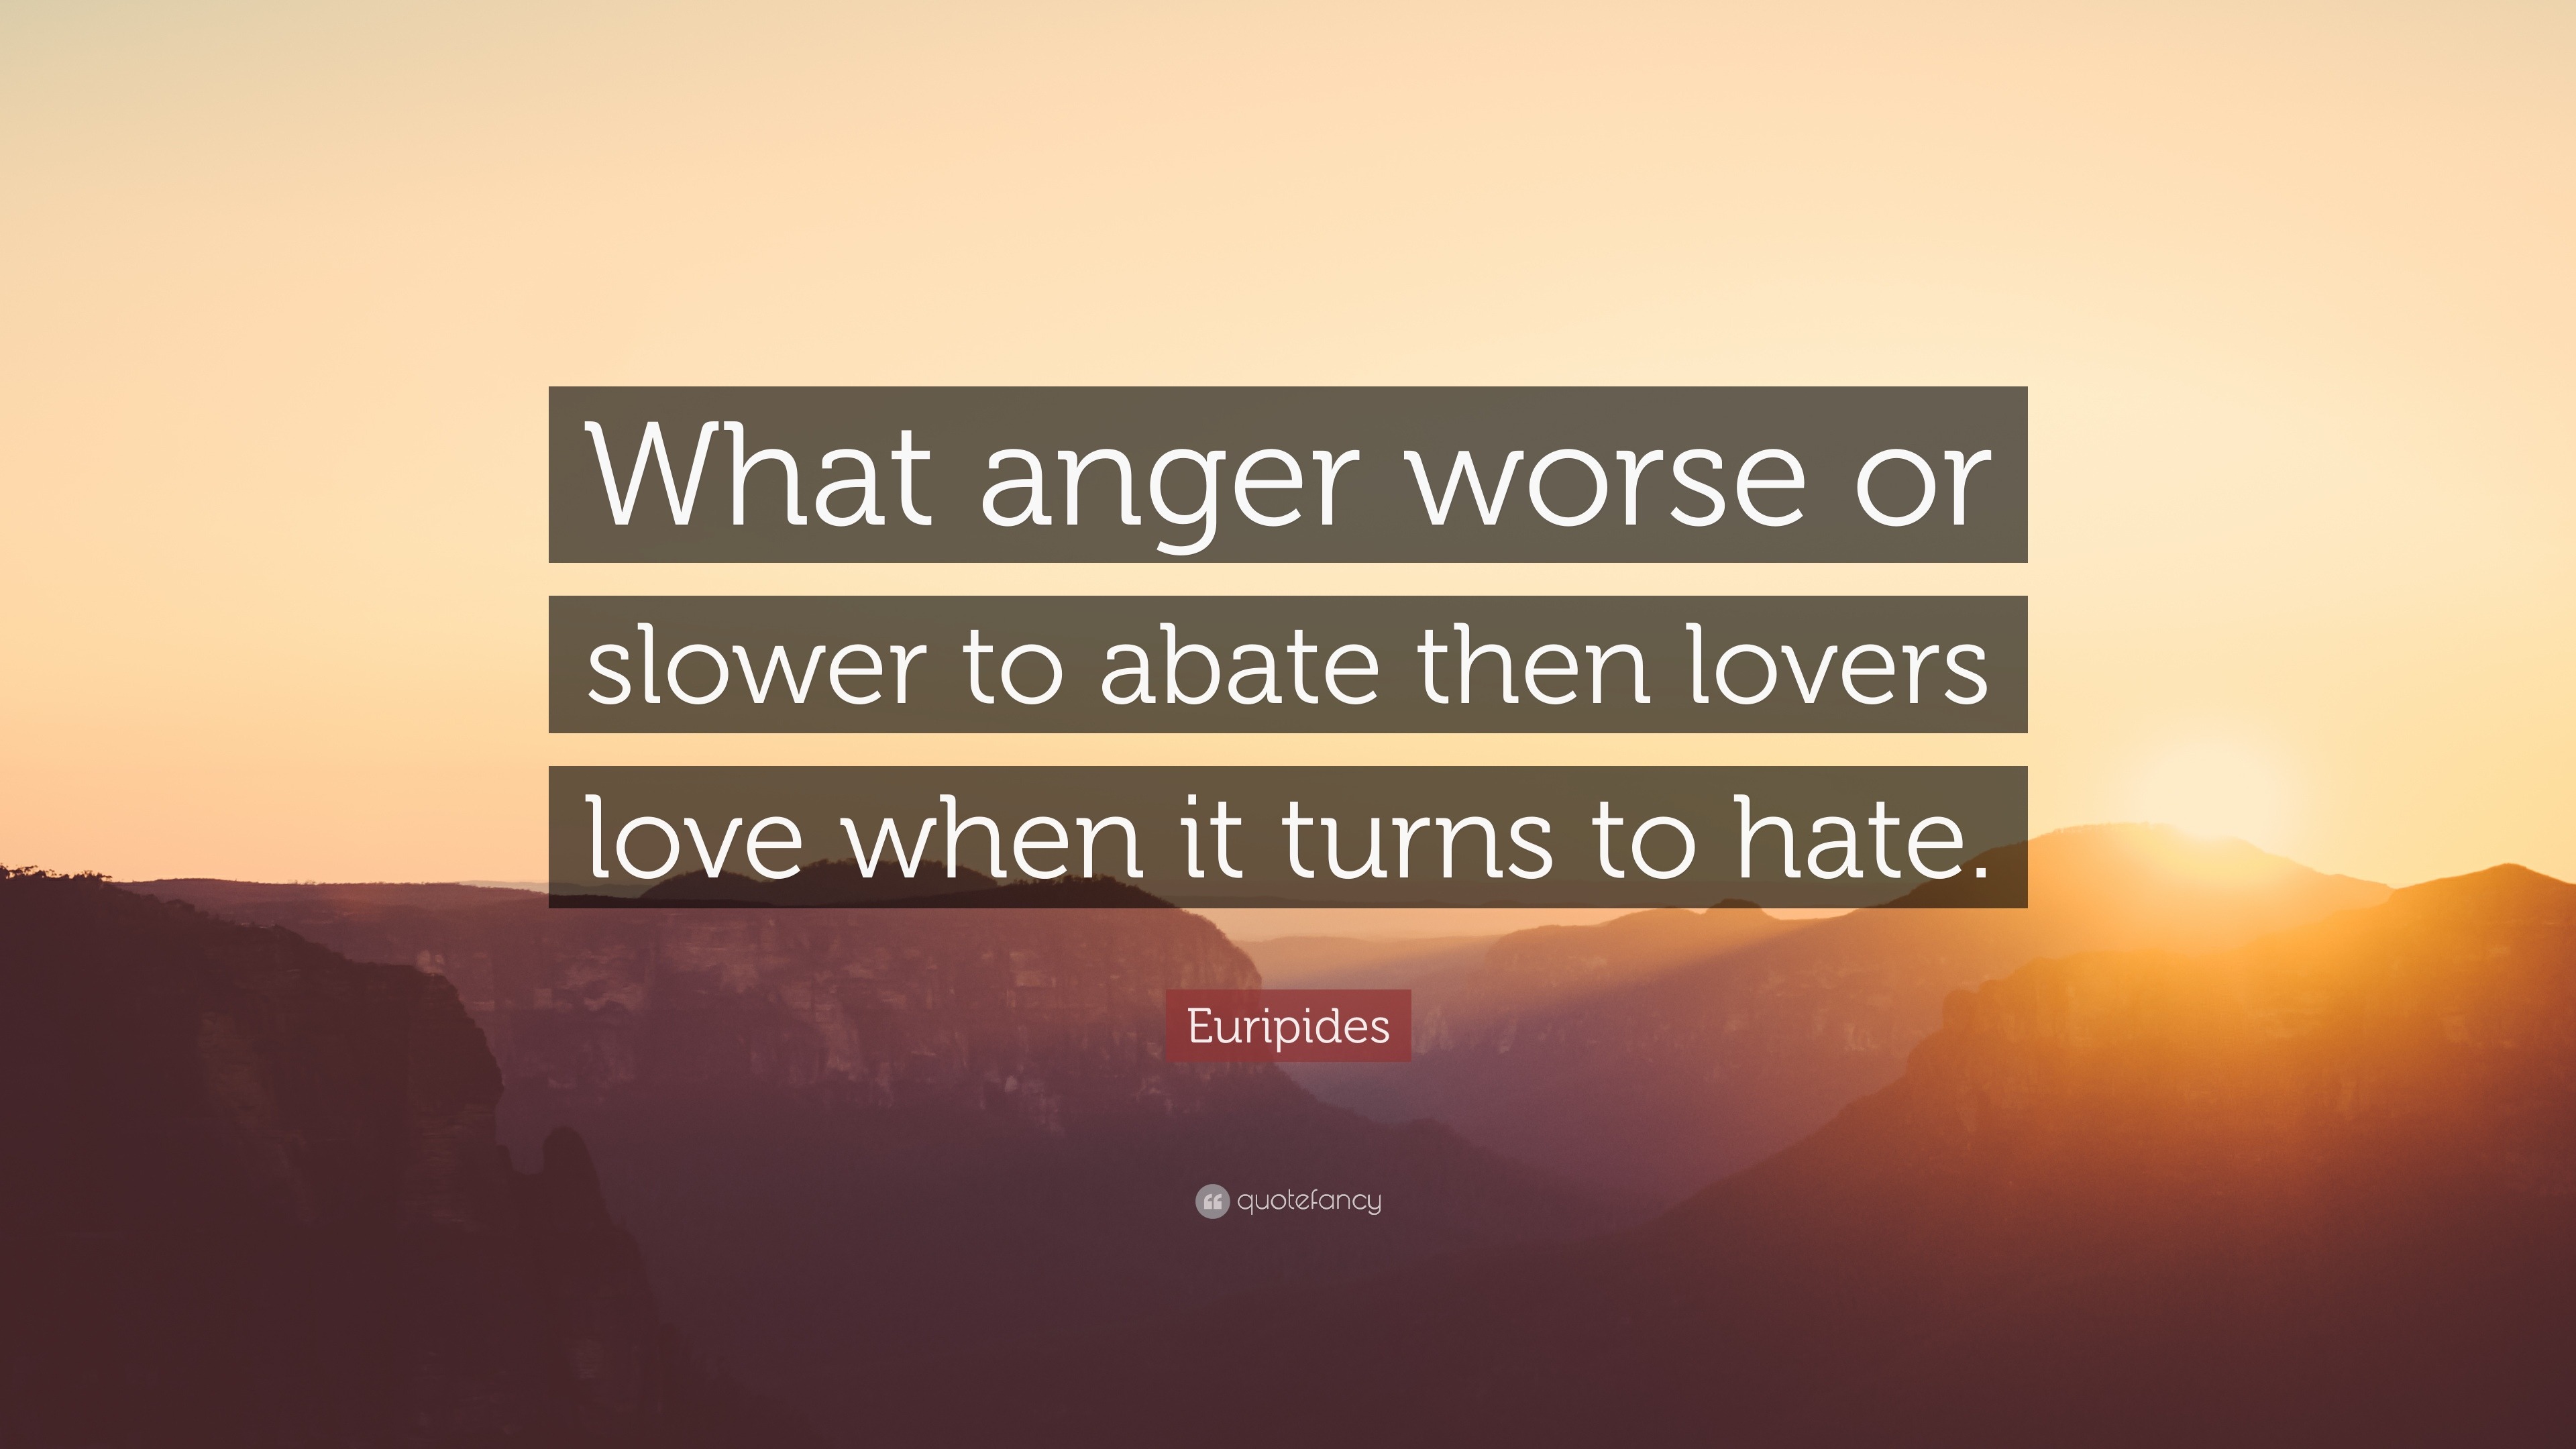 Euripides Quote “What anger worse or slower to abate then lovers love when it